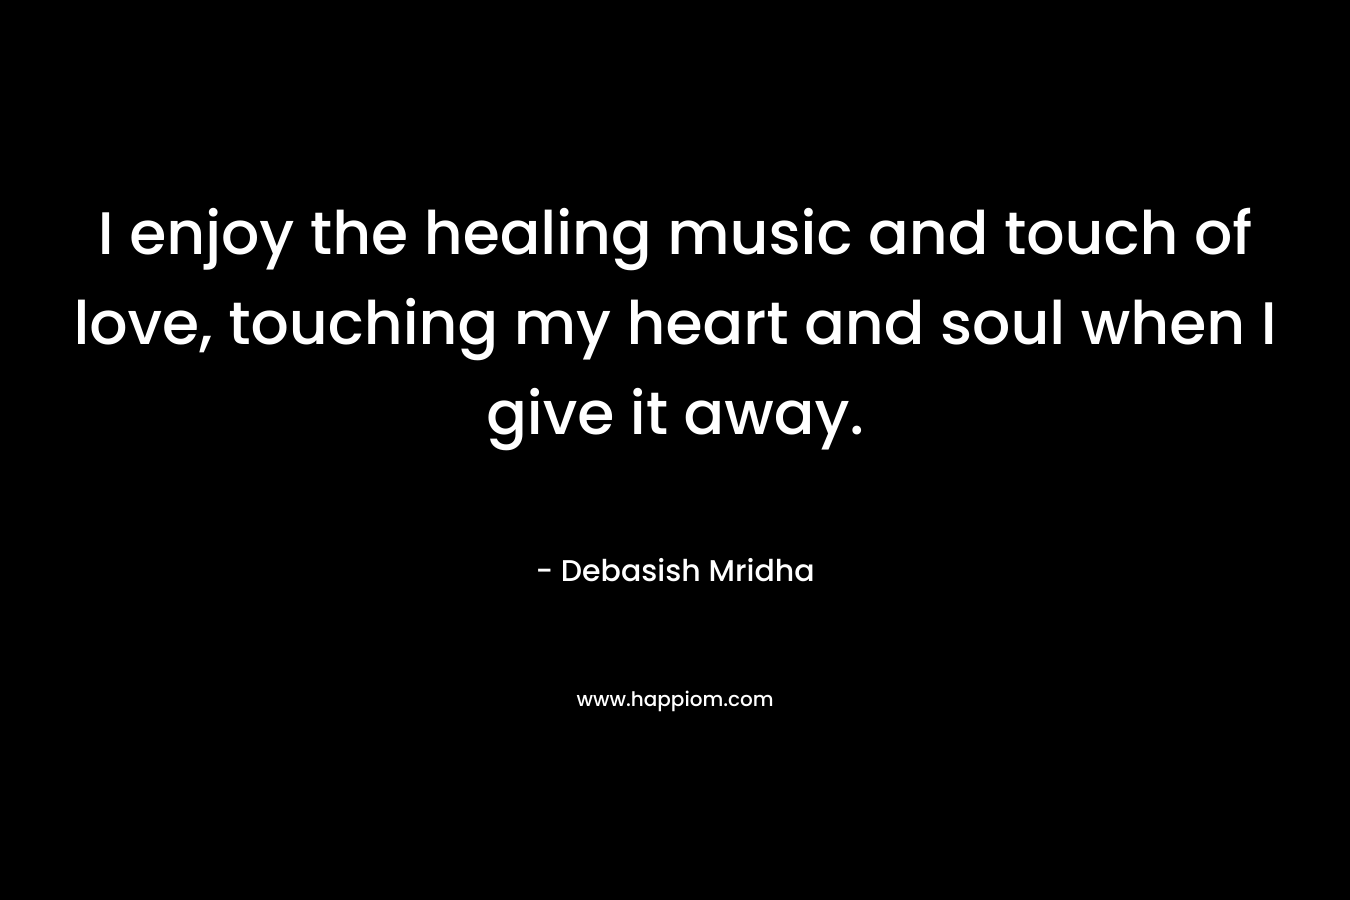 I enjoy the healing music and touch of love, touching my heart and soul when I give it away.